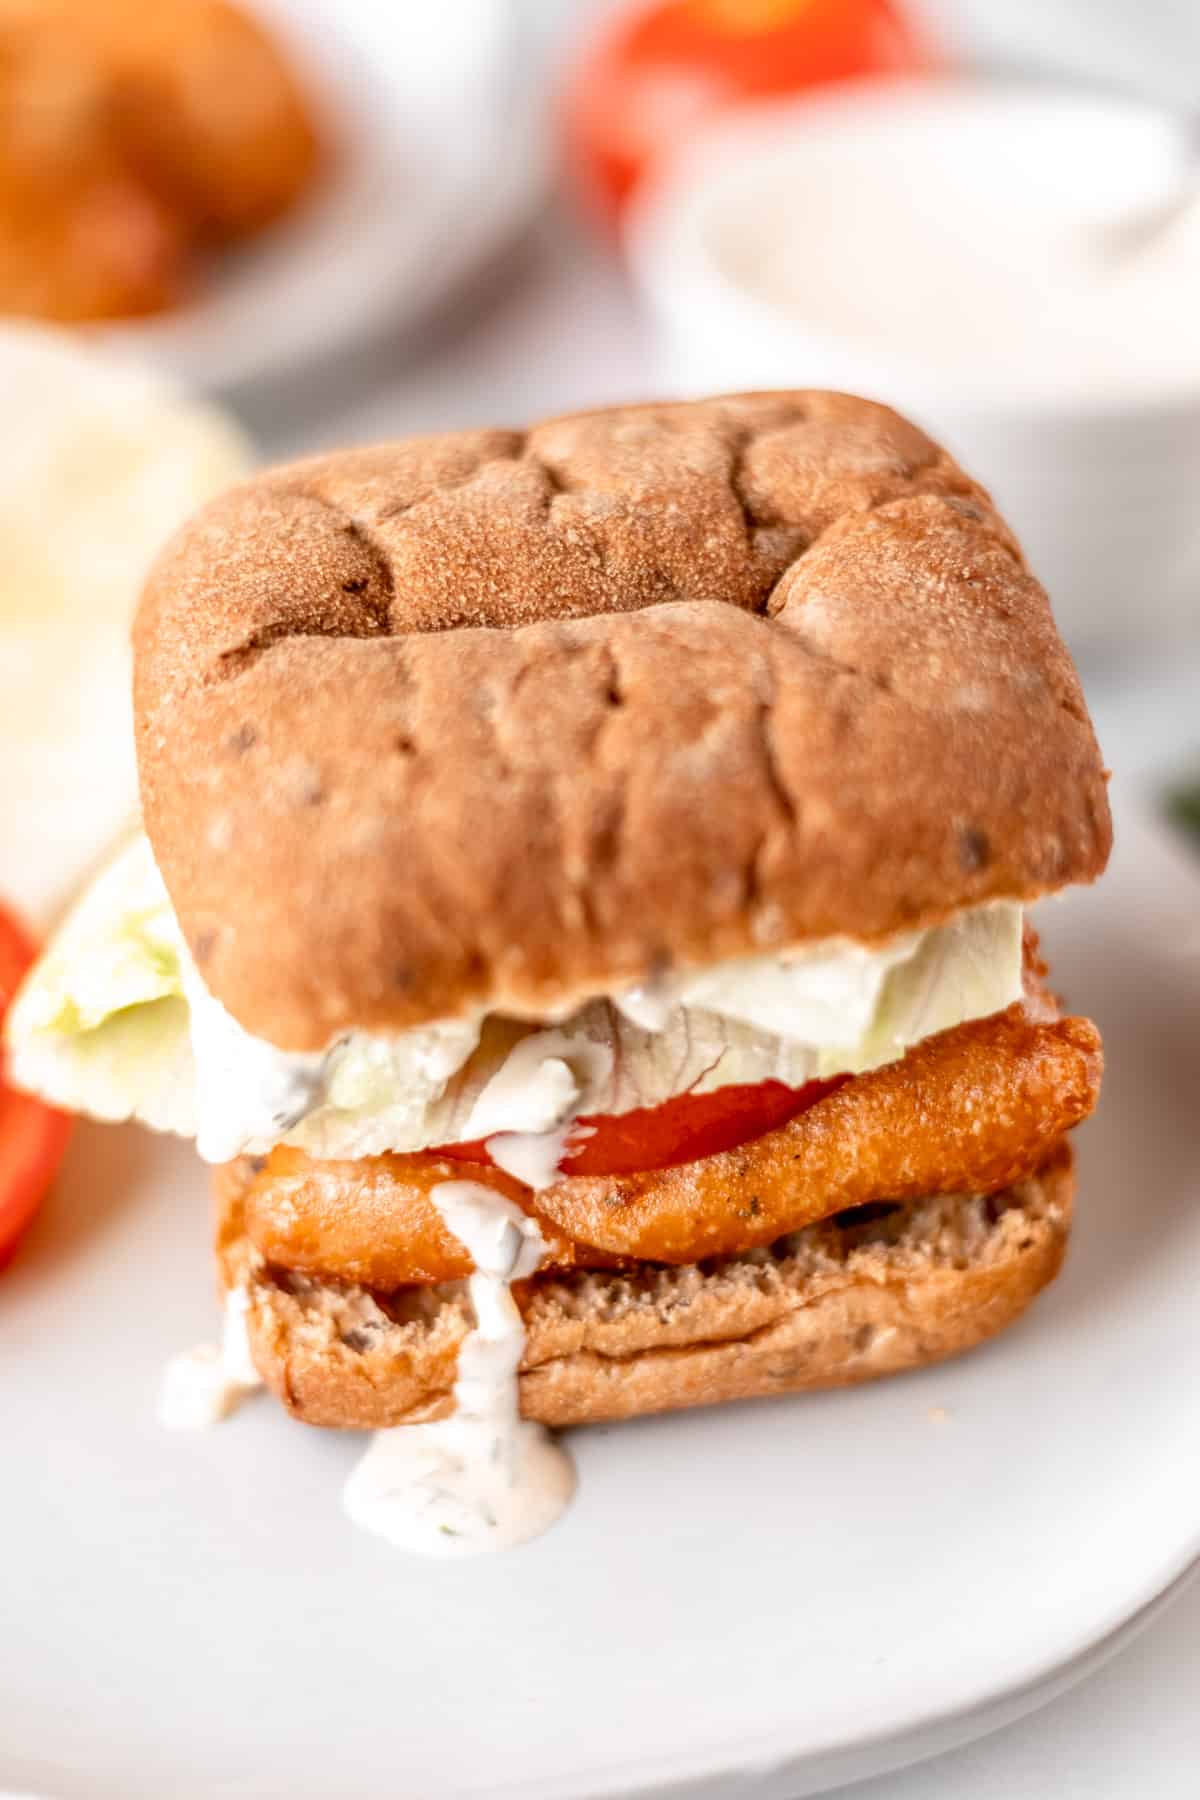 A cod sandwich with fried fish, lettuce, tomato and tartar sauce on a white plate with ingredients blurred in the background.